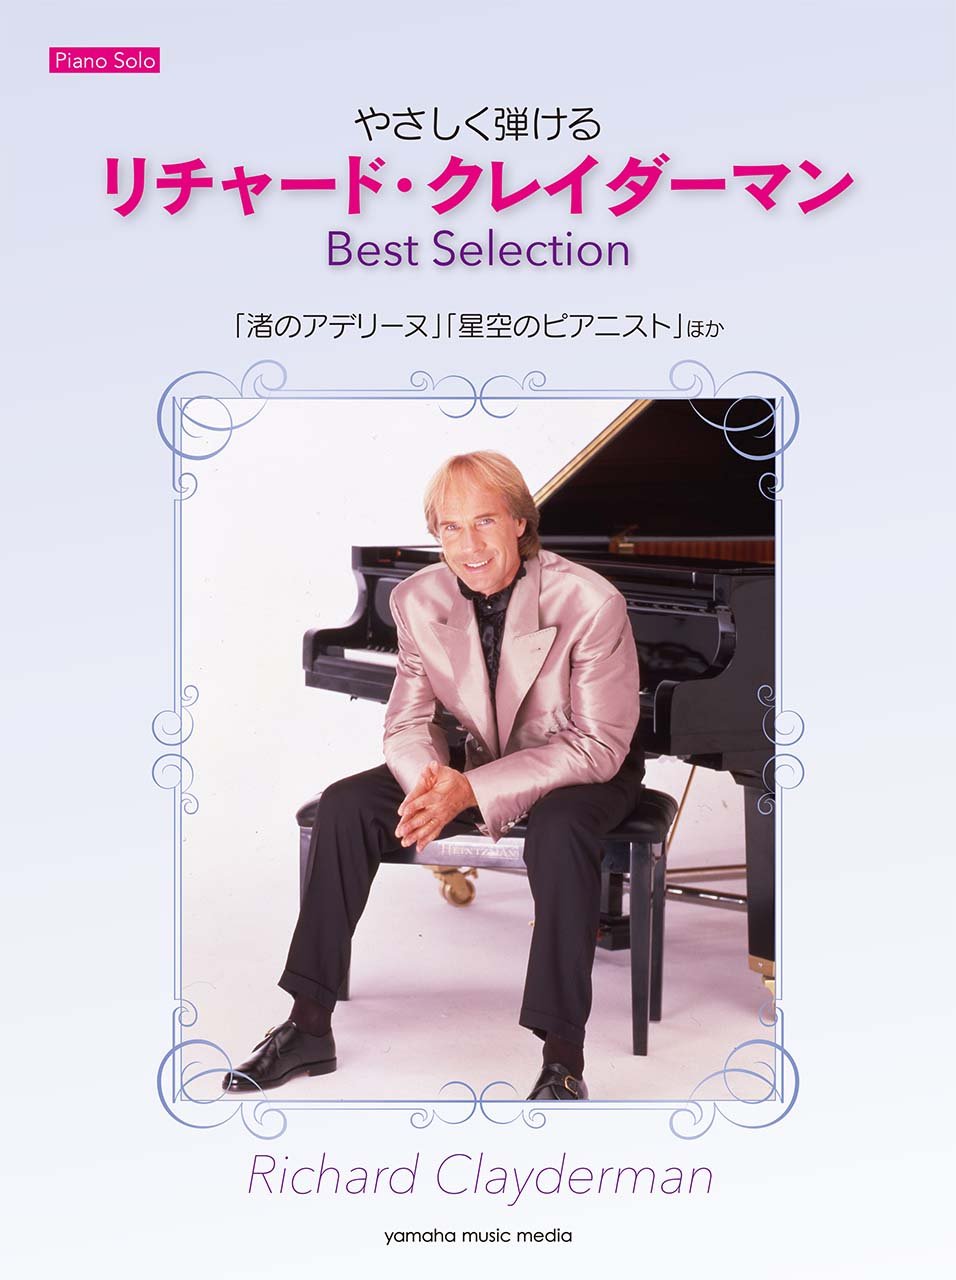 Richard Clayderman Best Selection Easy Piano Solo Sheet Music Book